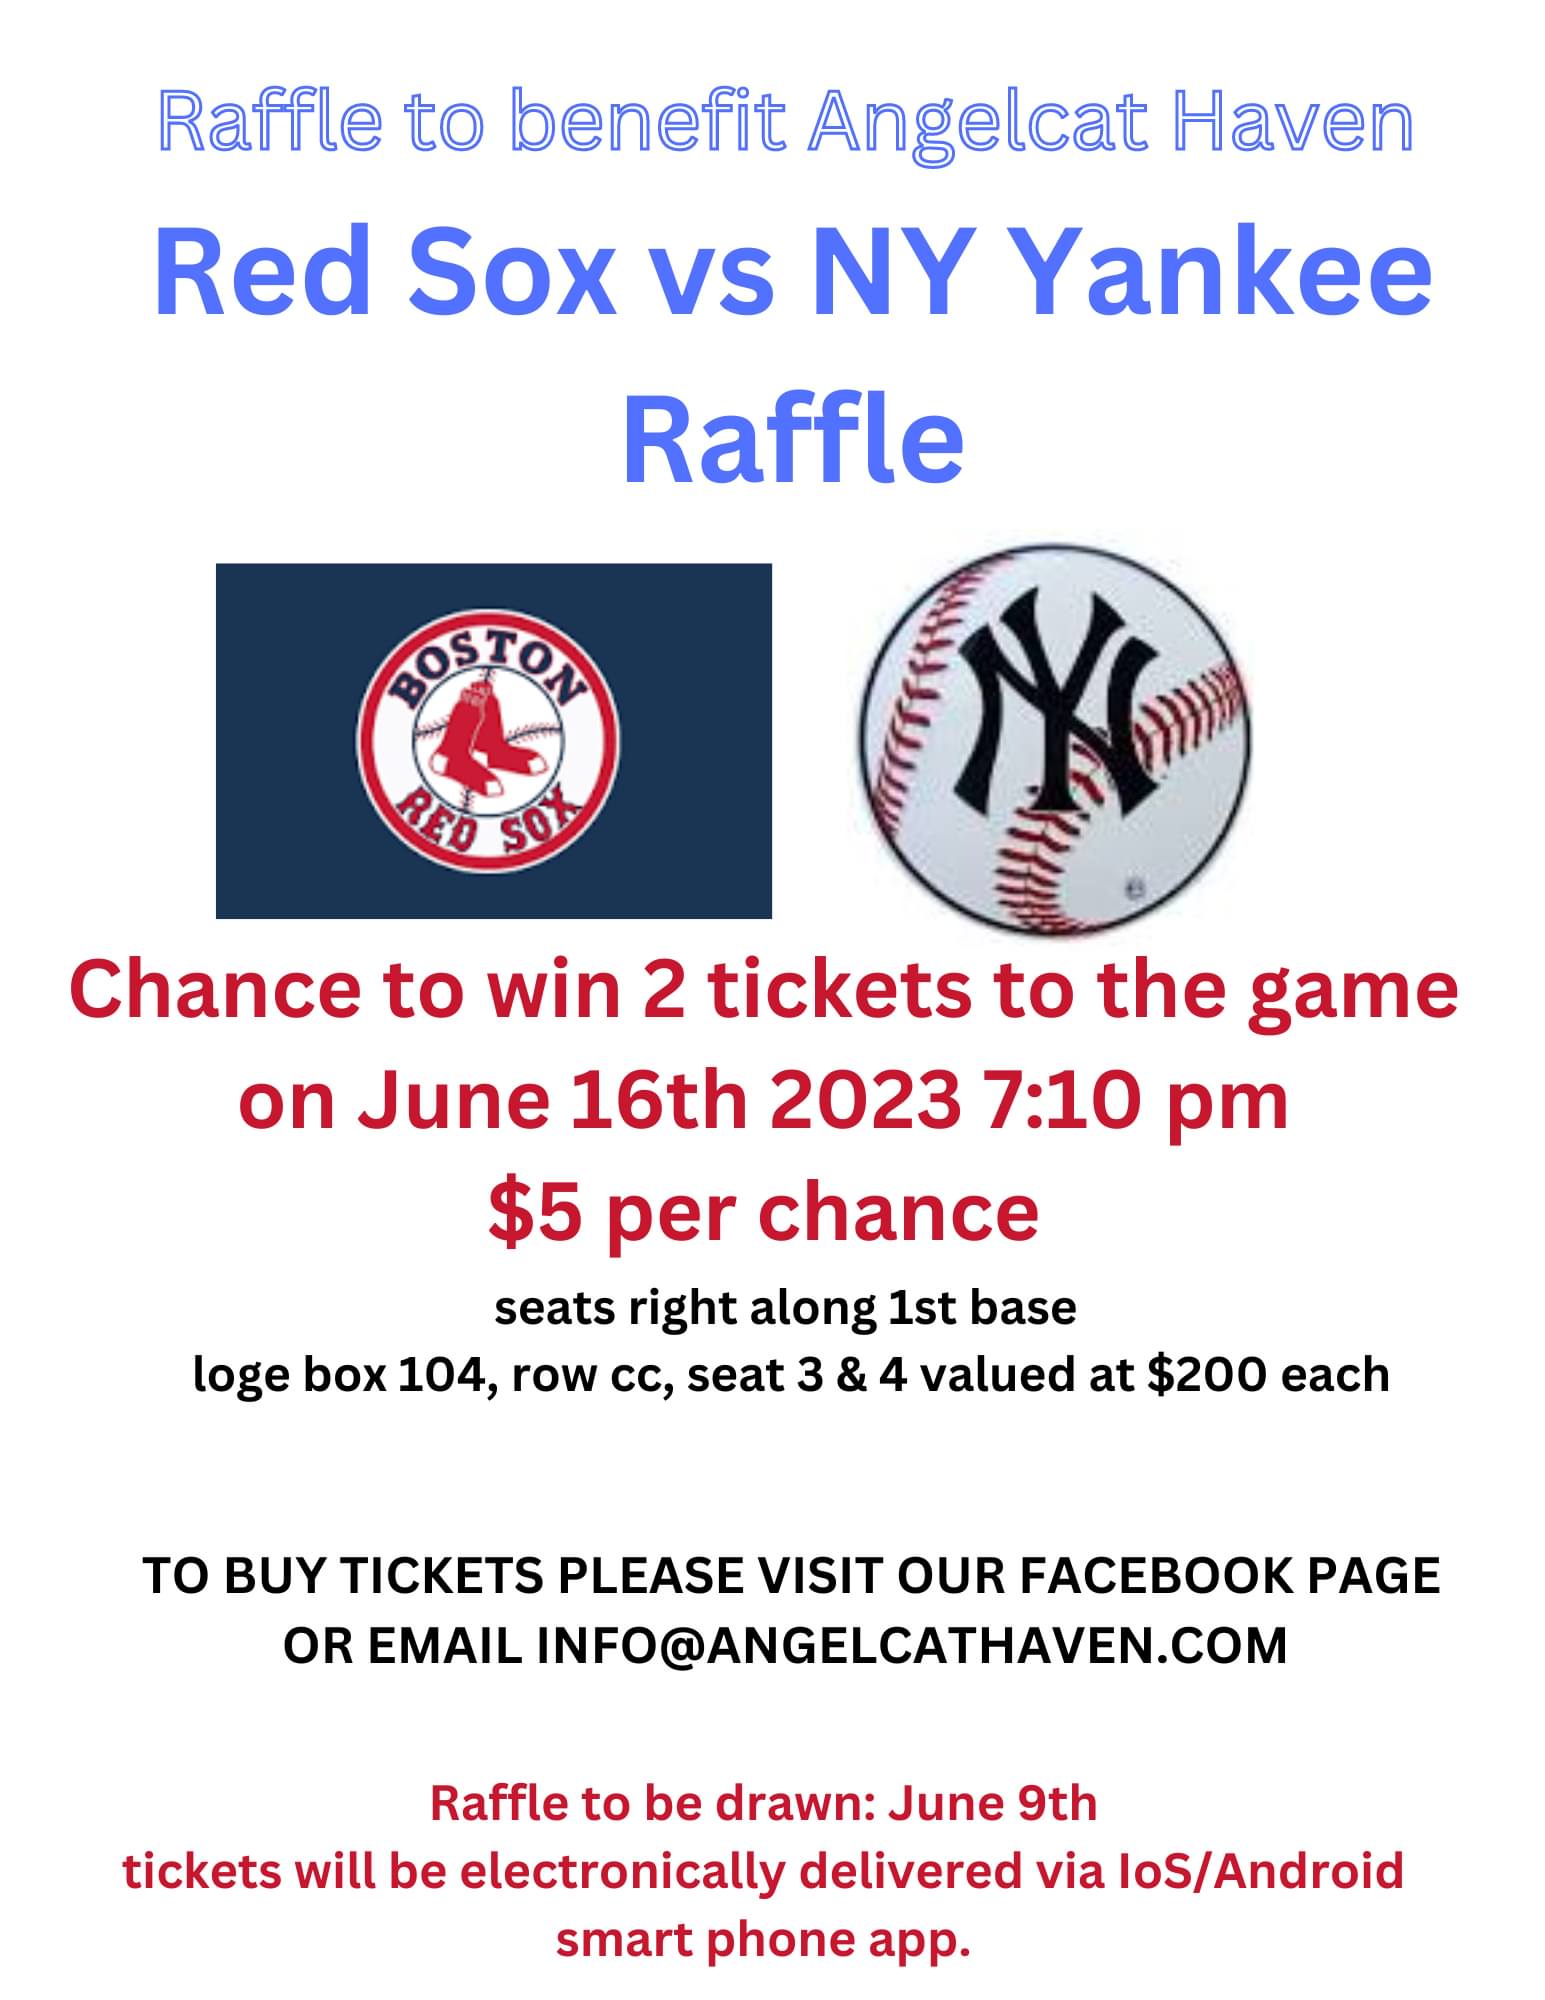 Raffle Tickets for Red Sox vs NY Yankees game!